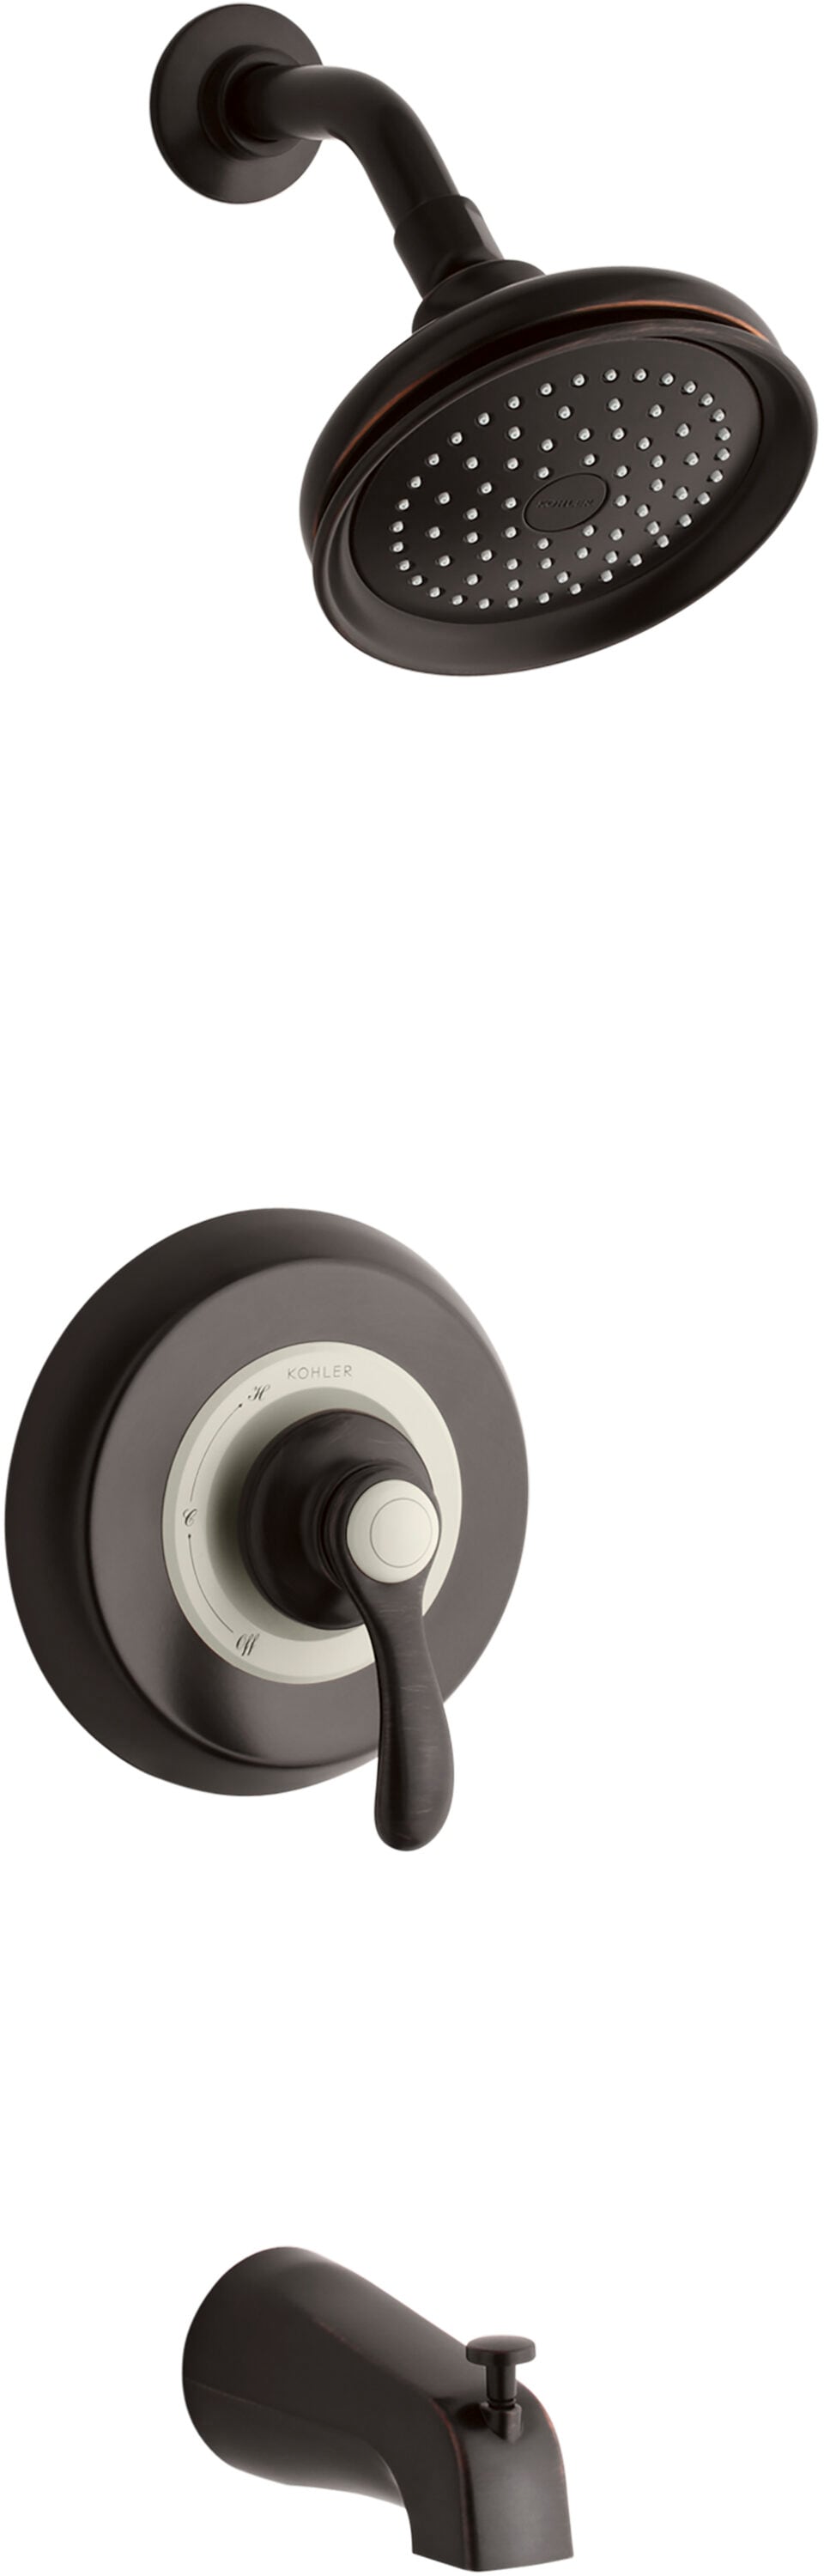 KOHLER Fairfax Oil-Rubbed Bronze 1-handle Single Function Round Bathtub and Shower Faucet